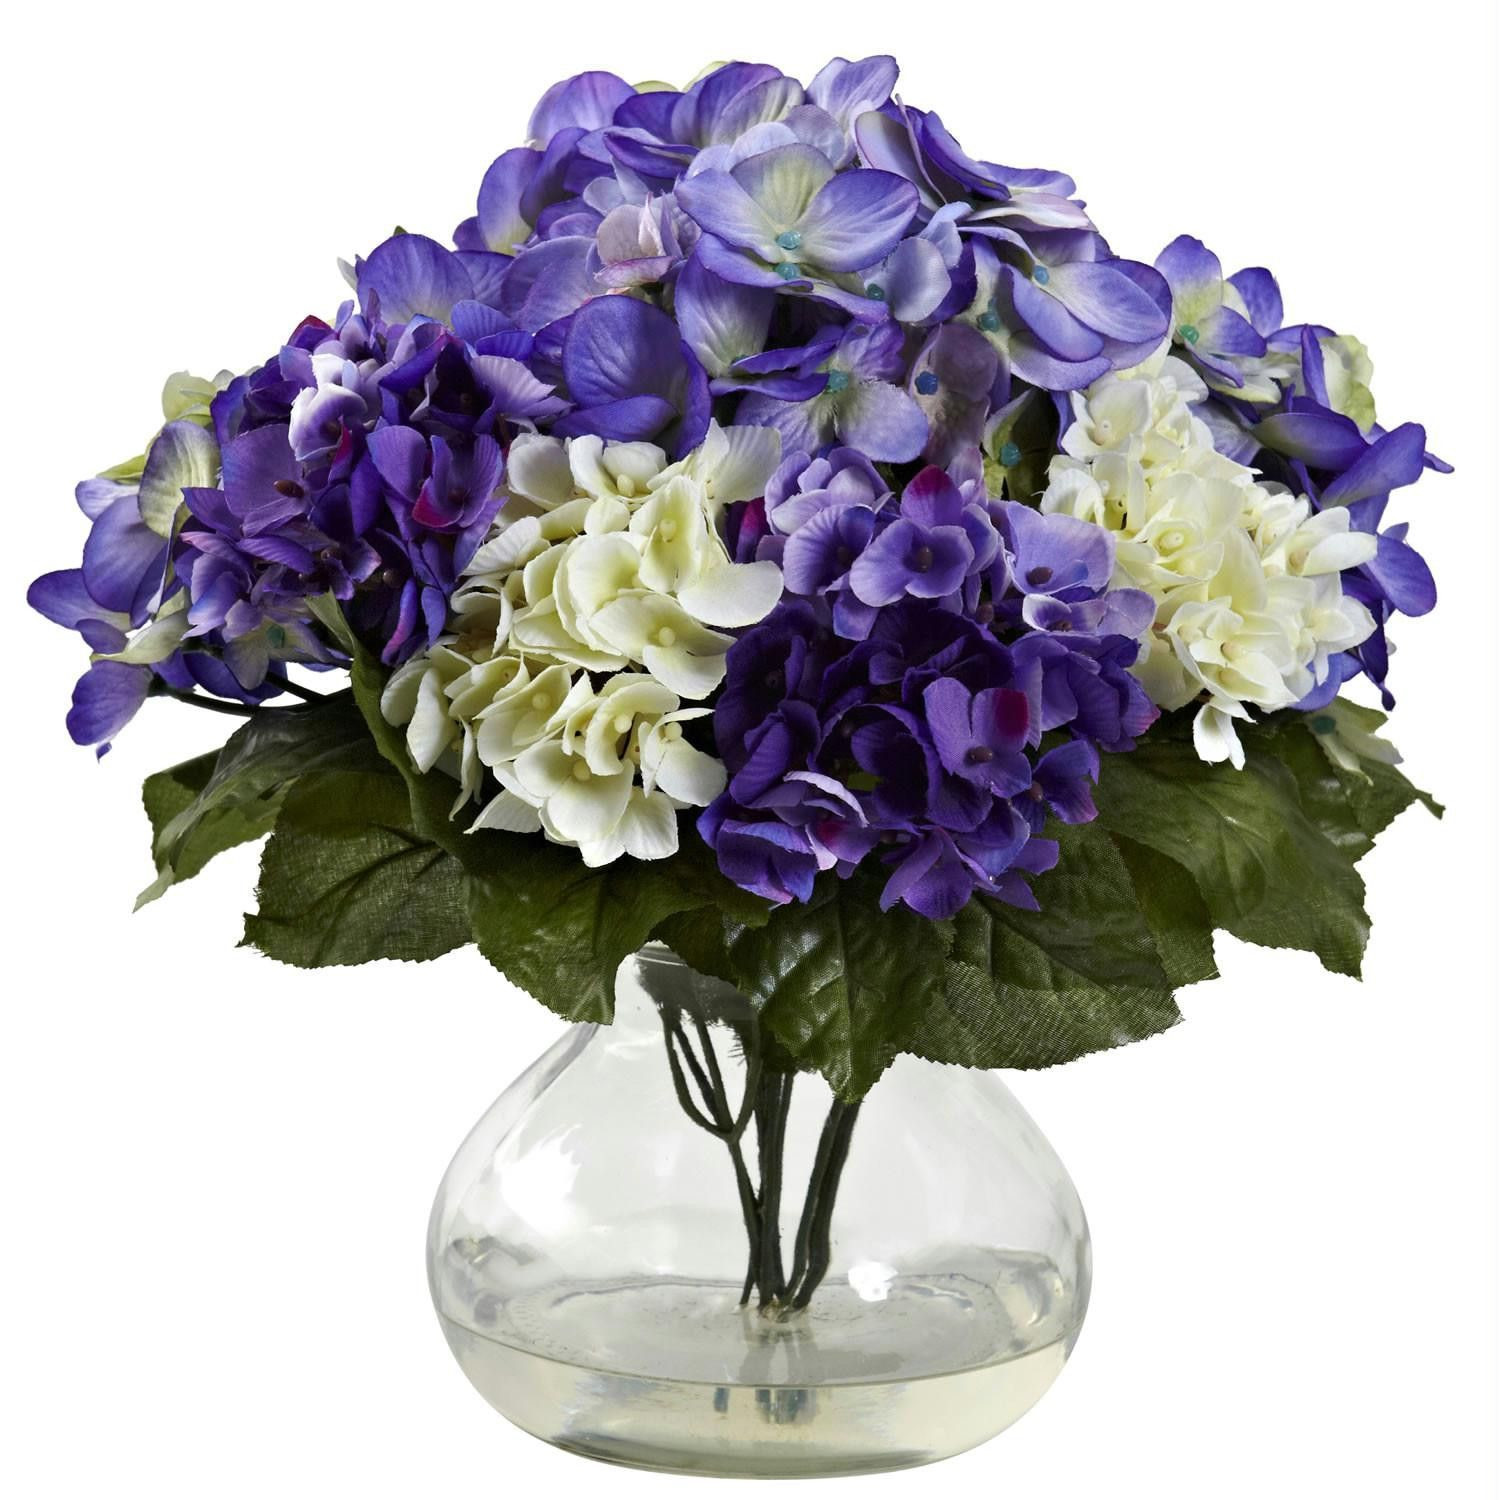 19 Fashionable 4 Inch Cube Vase 2022 free download 4 inch cube vase of mixed hydrangea w vase products pinterest hydrangea and products within the mixed silk hydrangea flowers with rosie posie vase will make a warm and welcoming addition to 